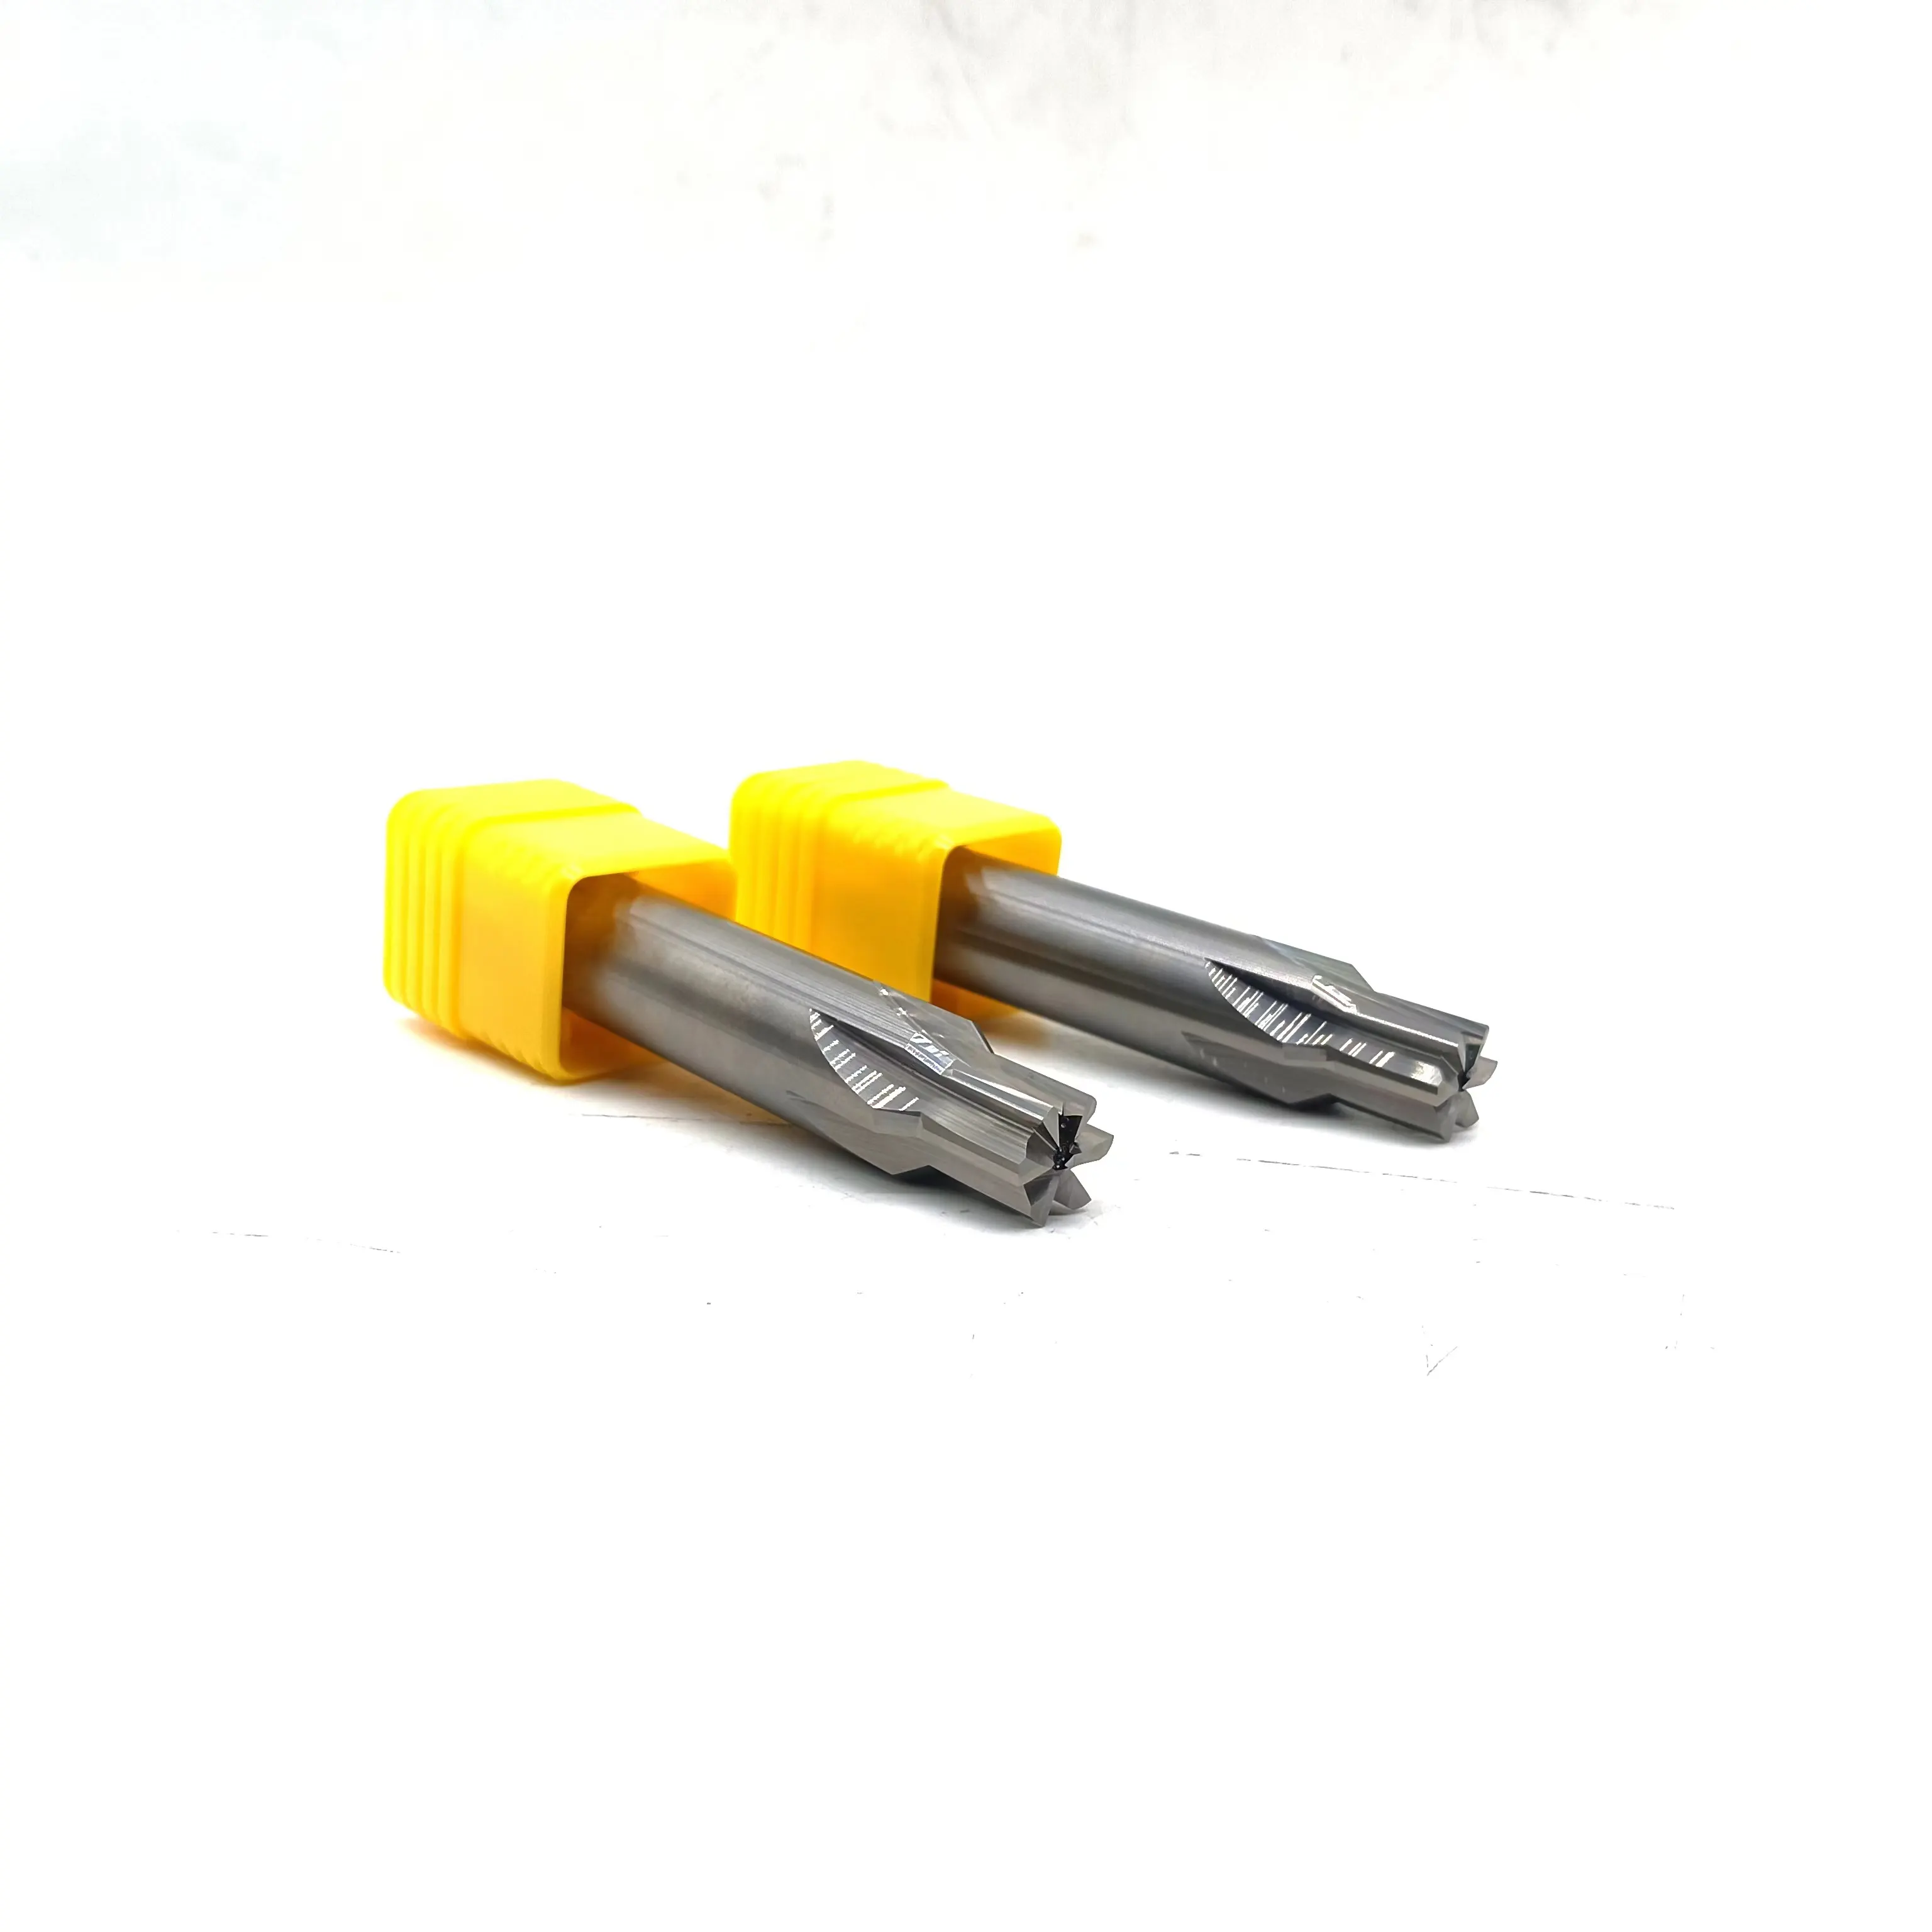 12.15mm solid tungsten carbide reamer best seller cnc machine metal cutting tool manufacturer products supplier